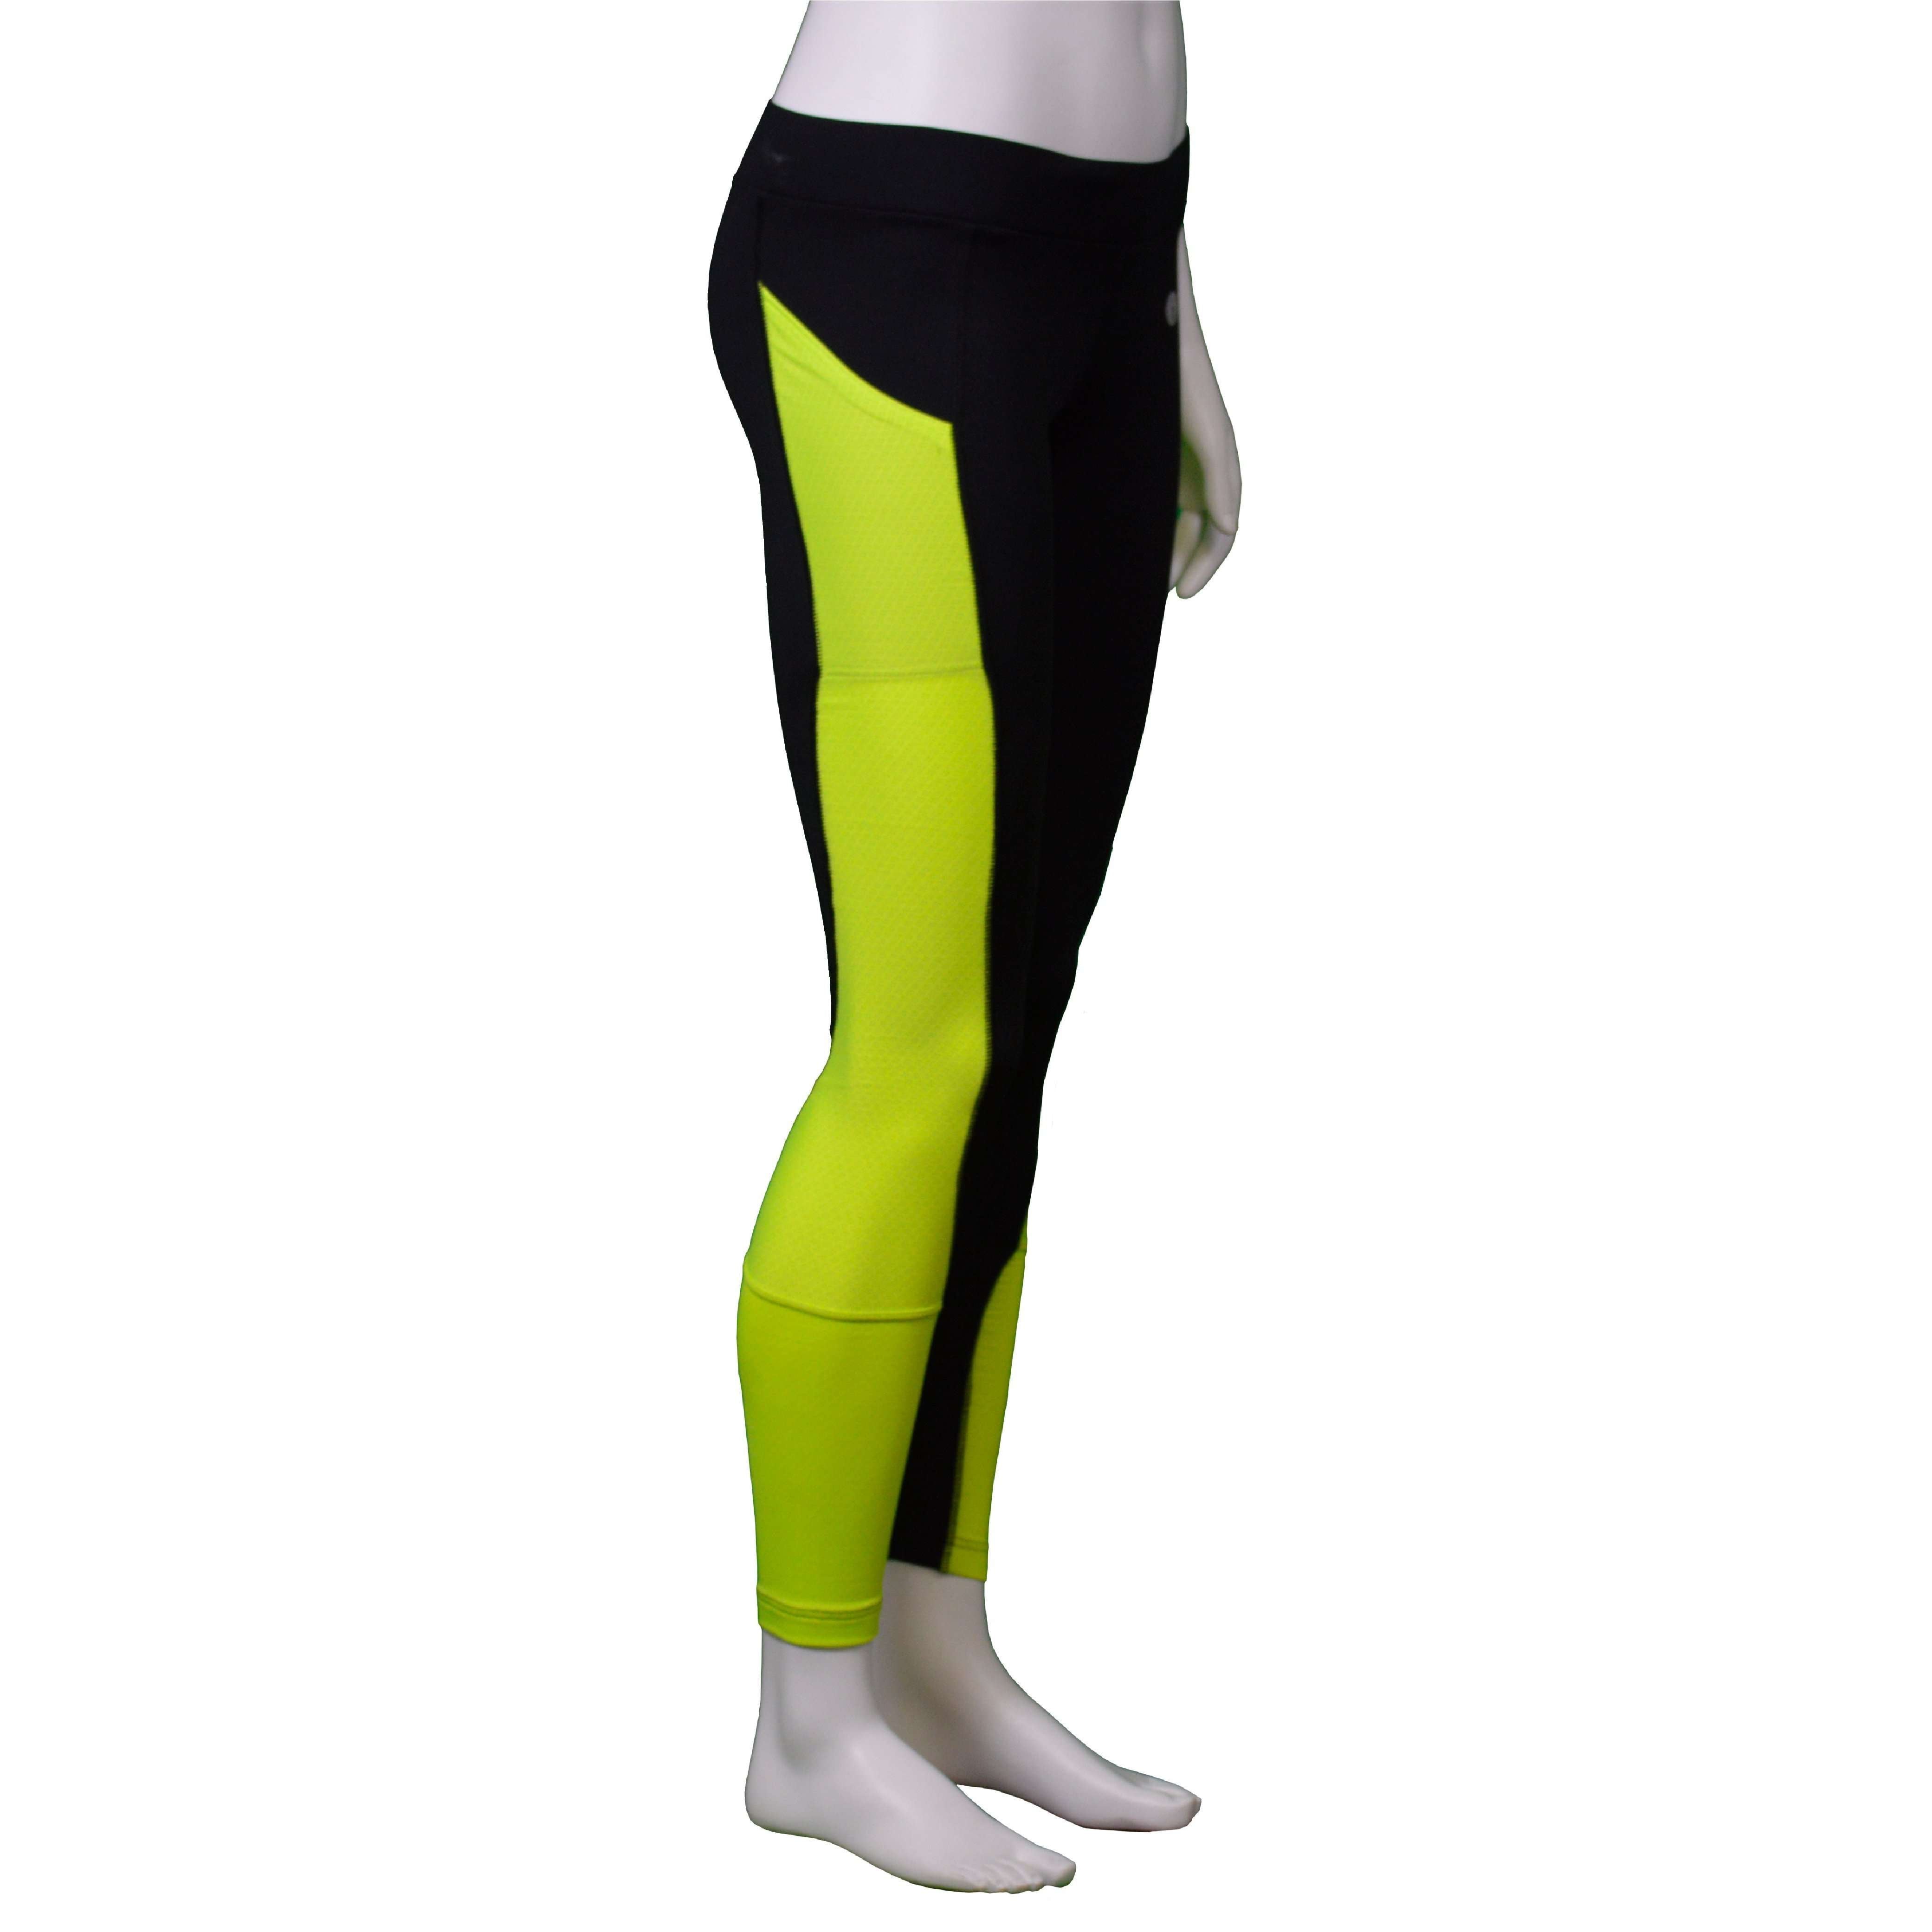 Comet Women's Reflective Running Tight in Black/Flo Lime